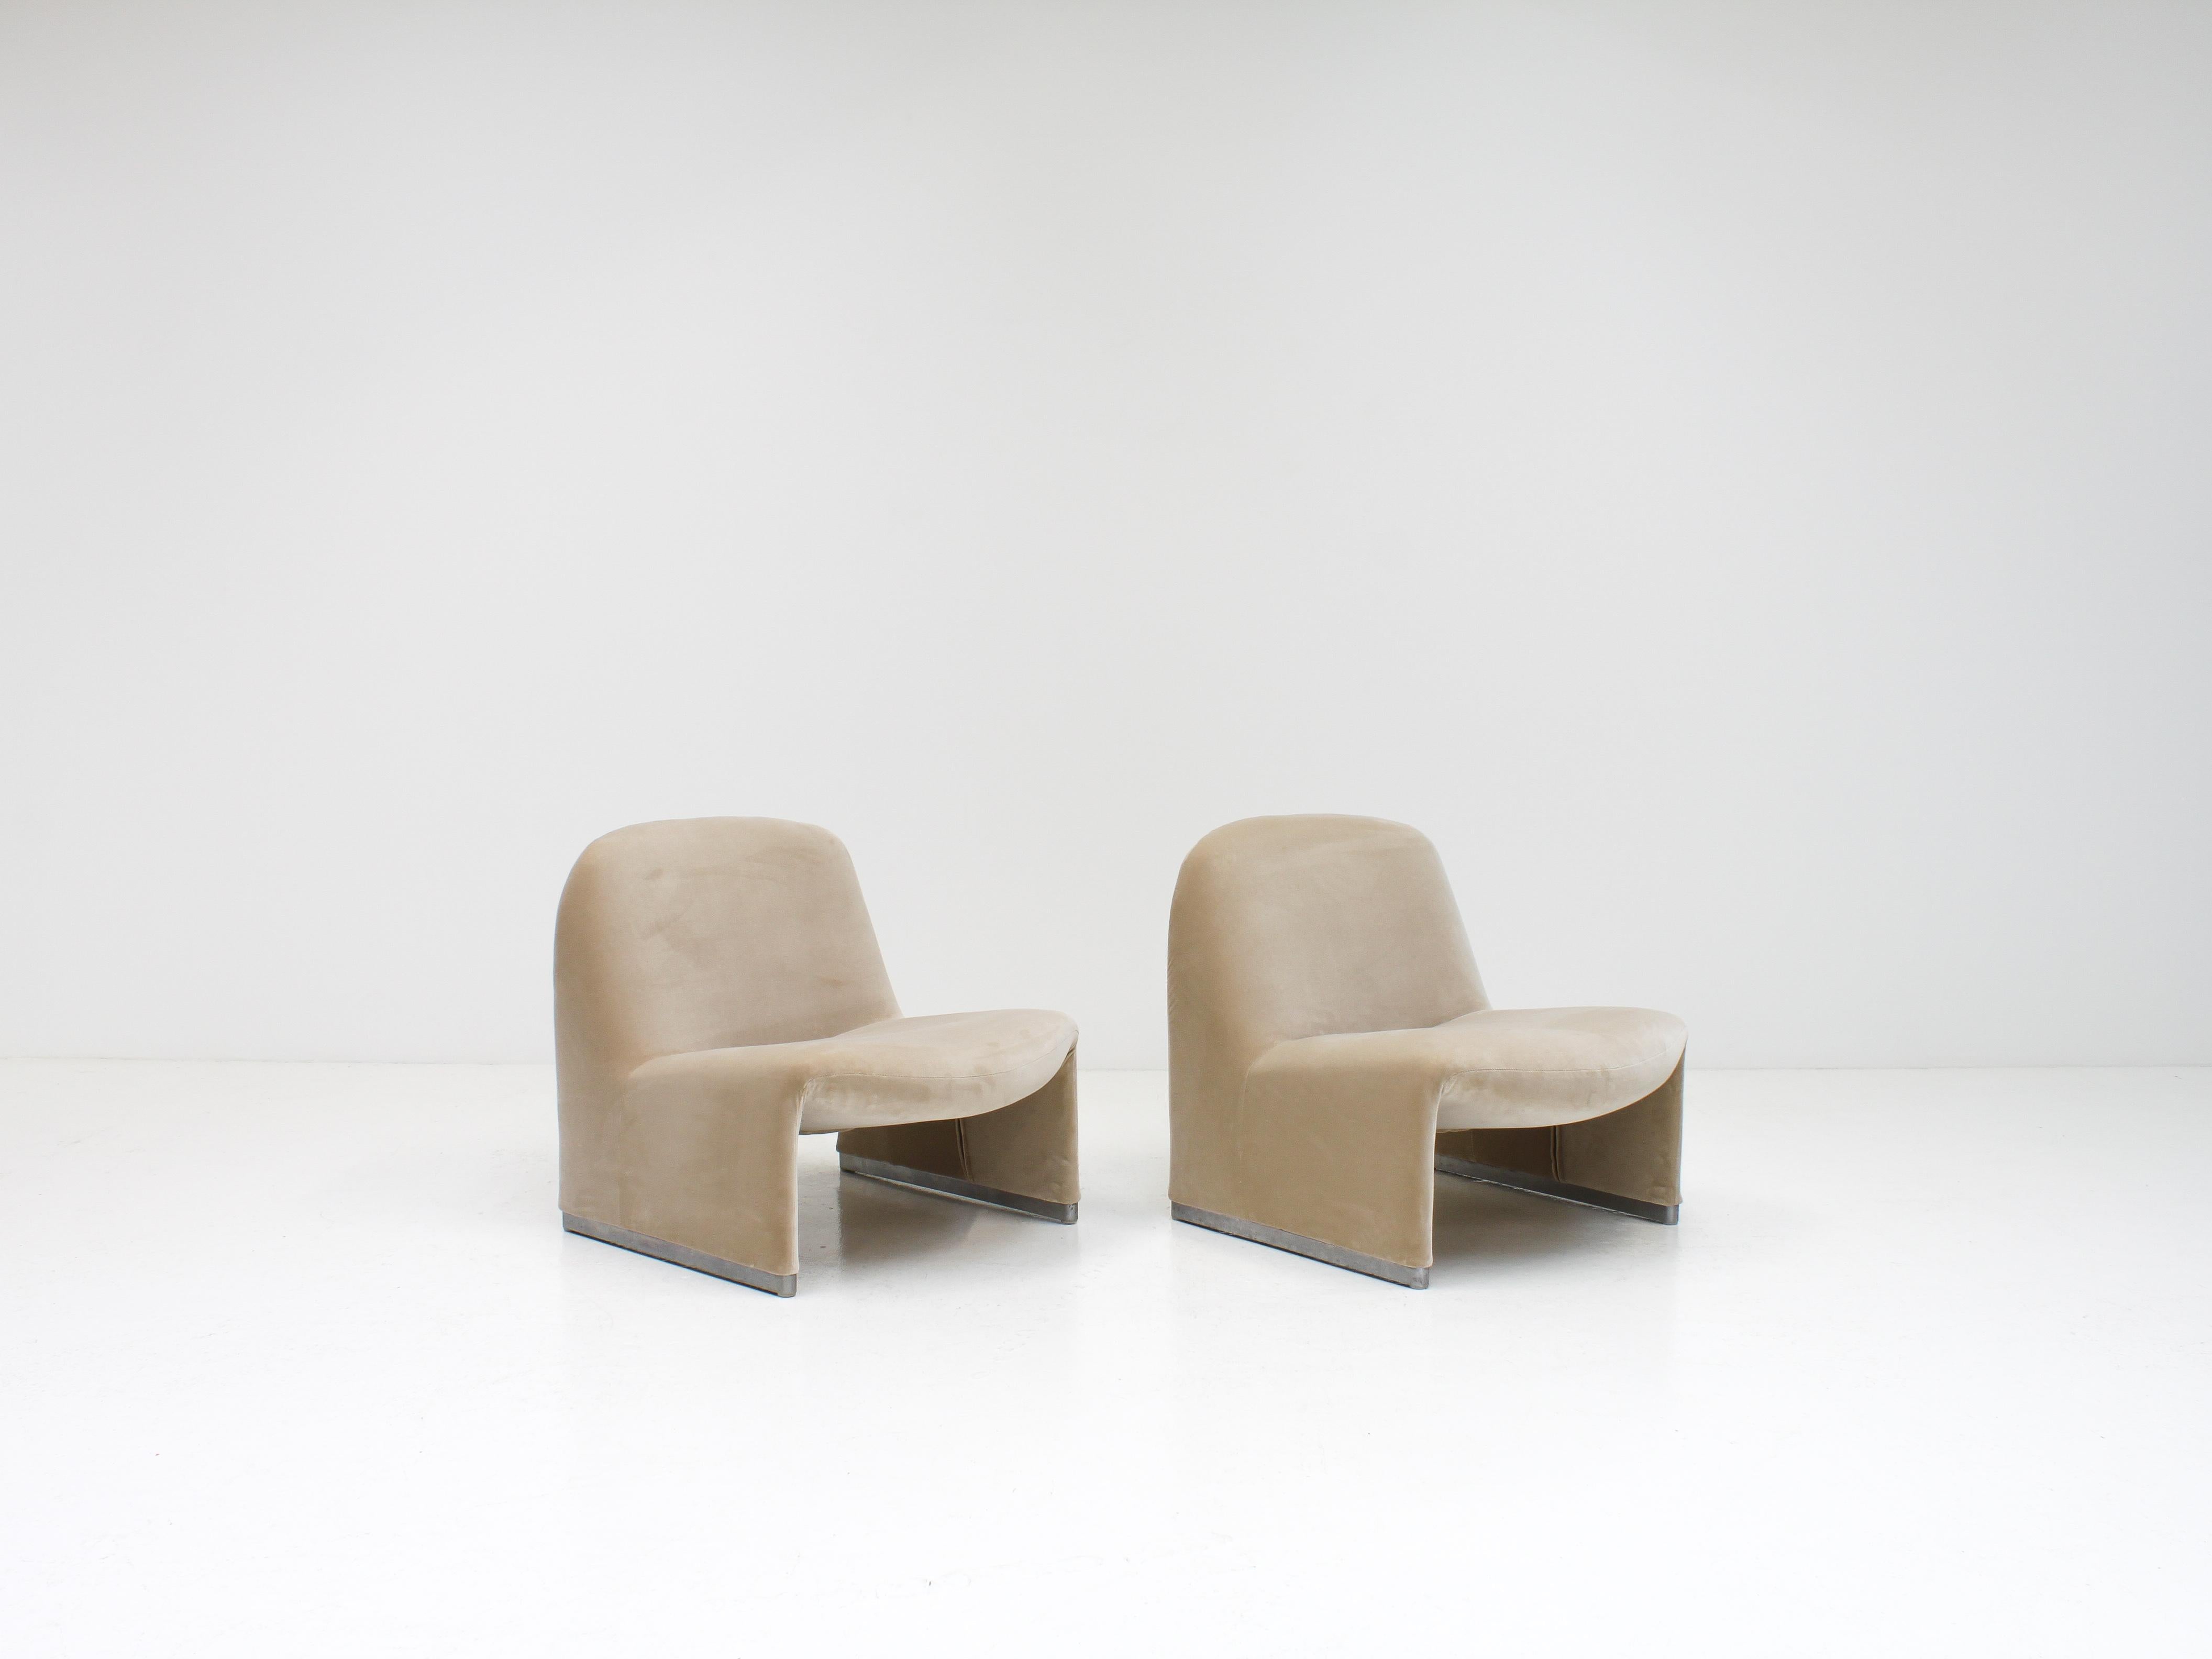 Steel Giancarlo Piretti “Alky” Chairs in New Velvet, Artifort, 1970s - *Customizable* For Sale